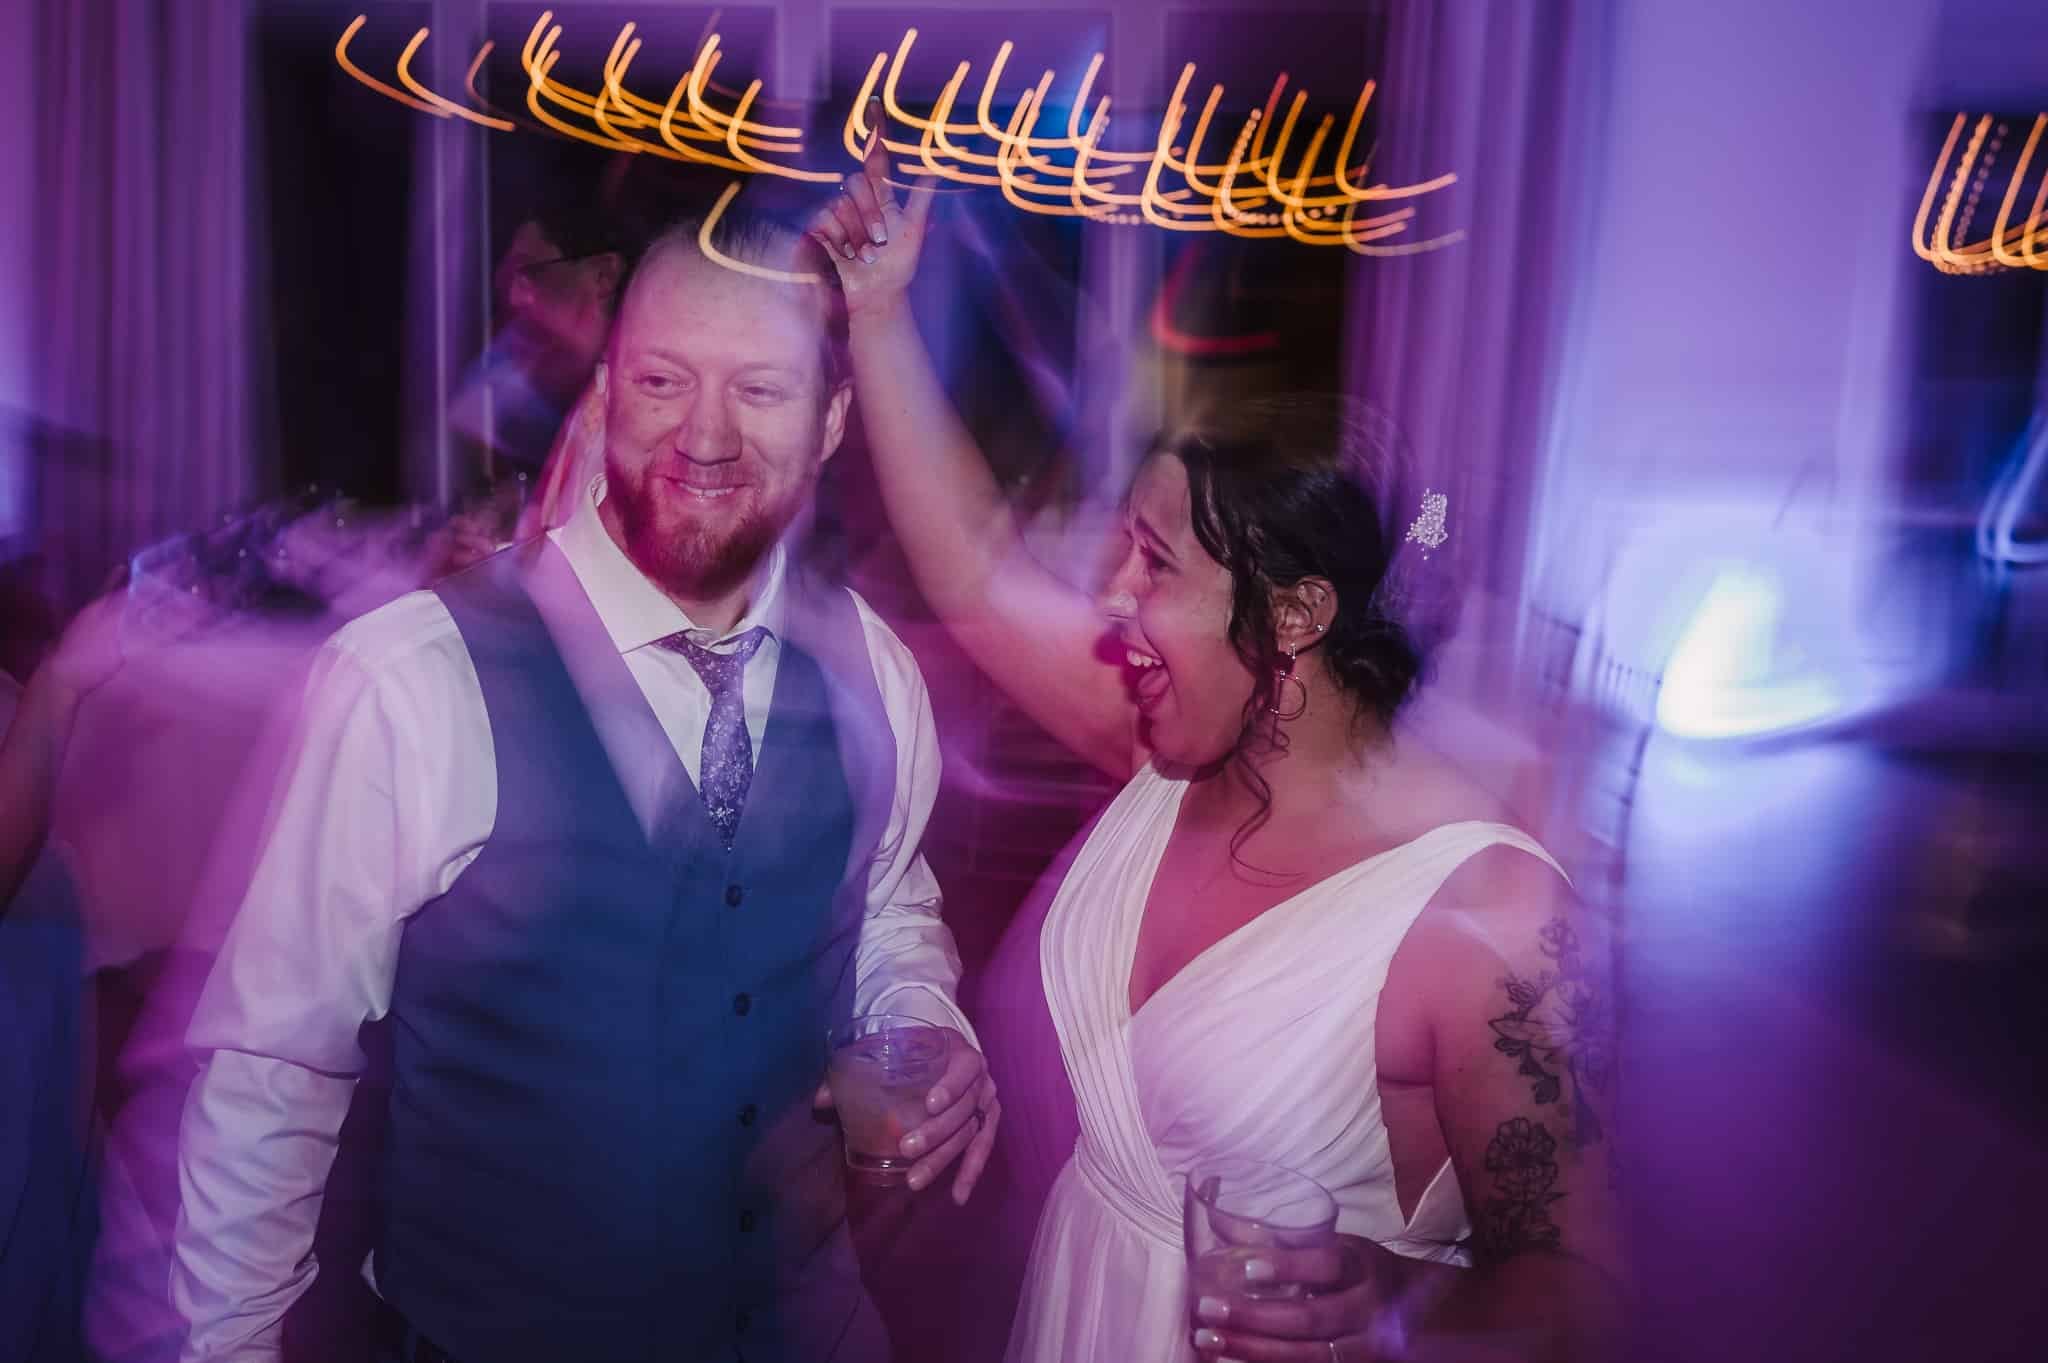 A motion-blur exposure of the bride and groom dancing creates swirls of purple, pink, and amber lights for a high-energy feeling.